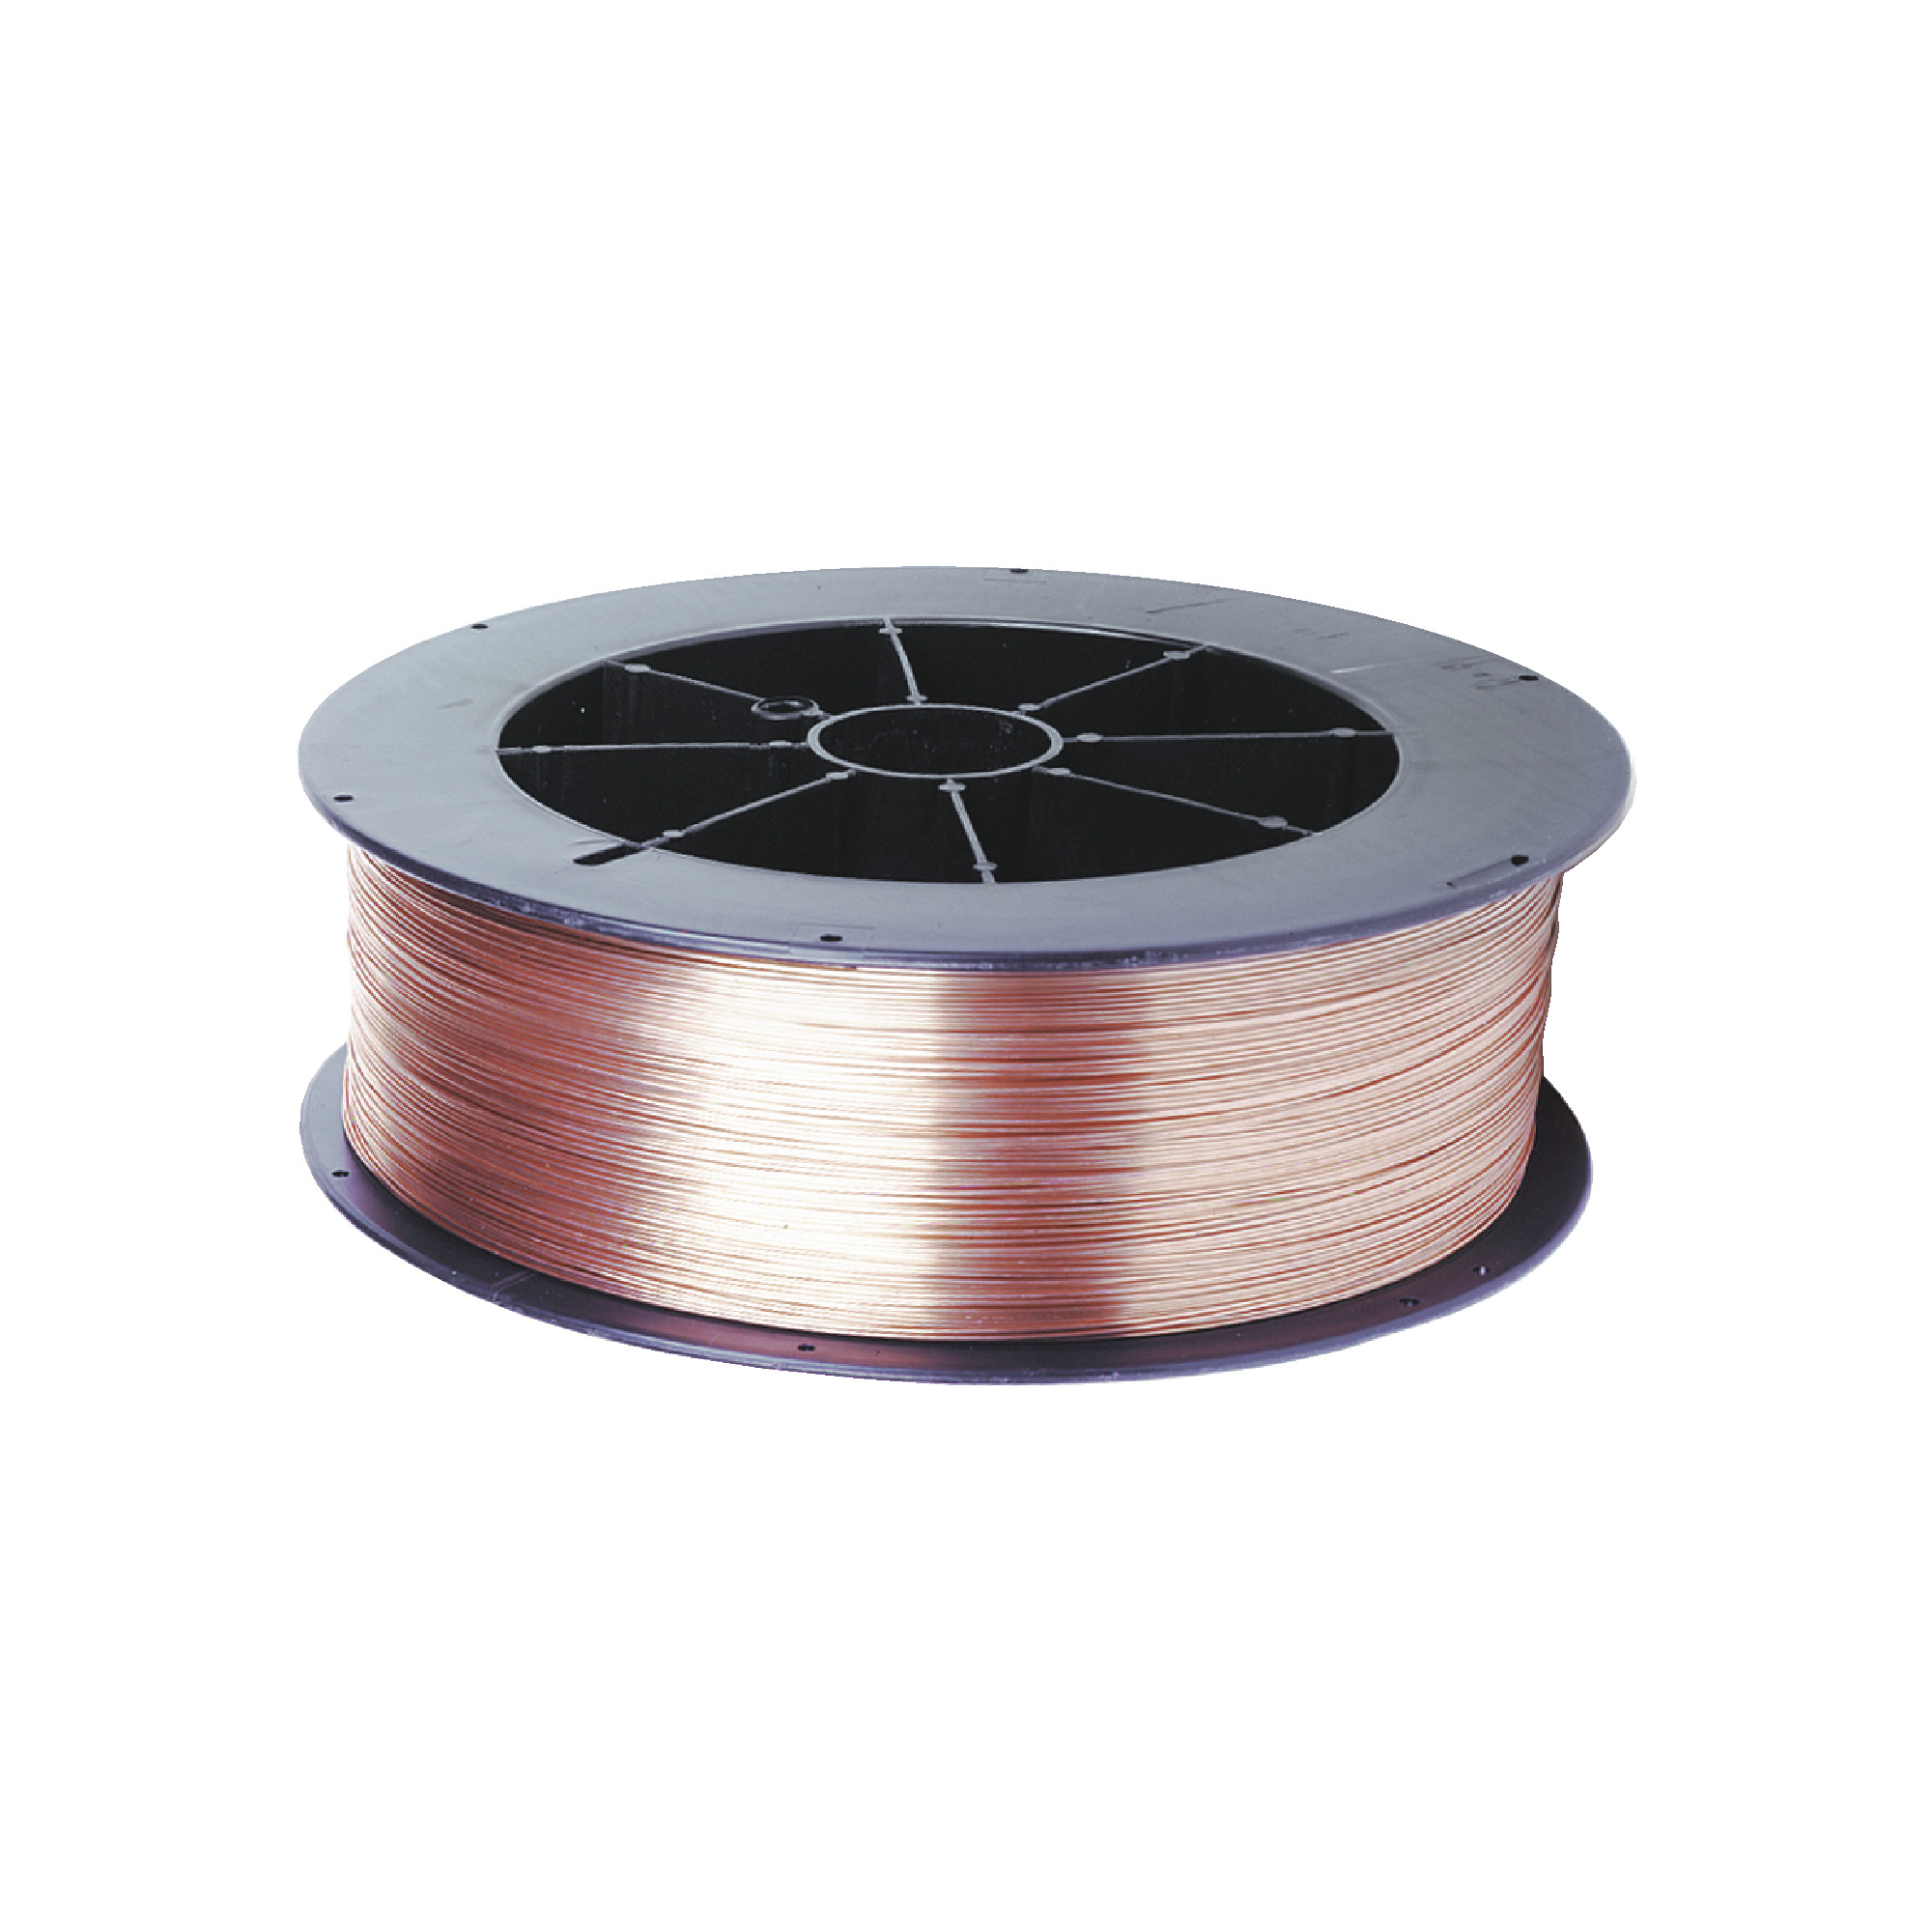 .025" ER70S-6 Super Arc L-56 Copper Coated Carbon Steel MIG Welding Wire - 12.5 lbs. Spool